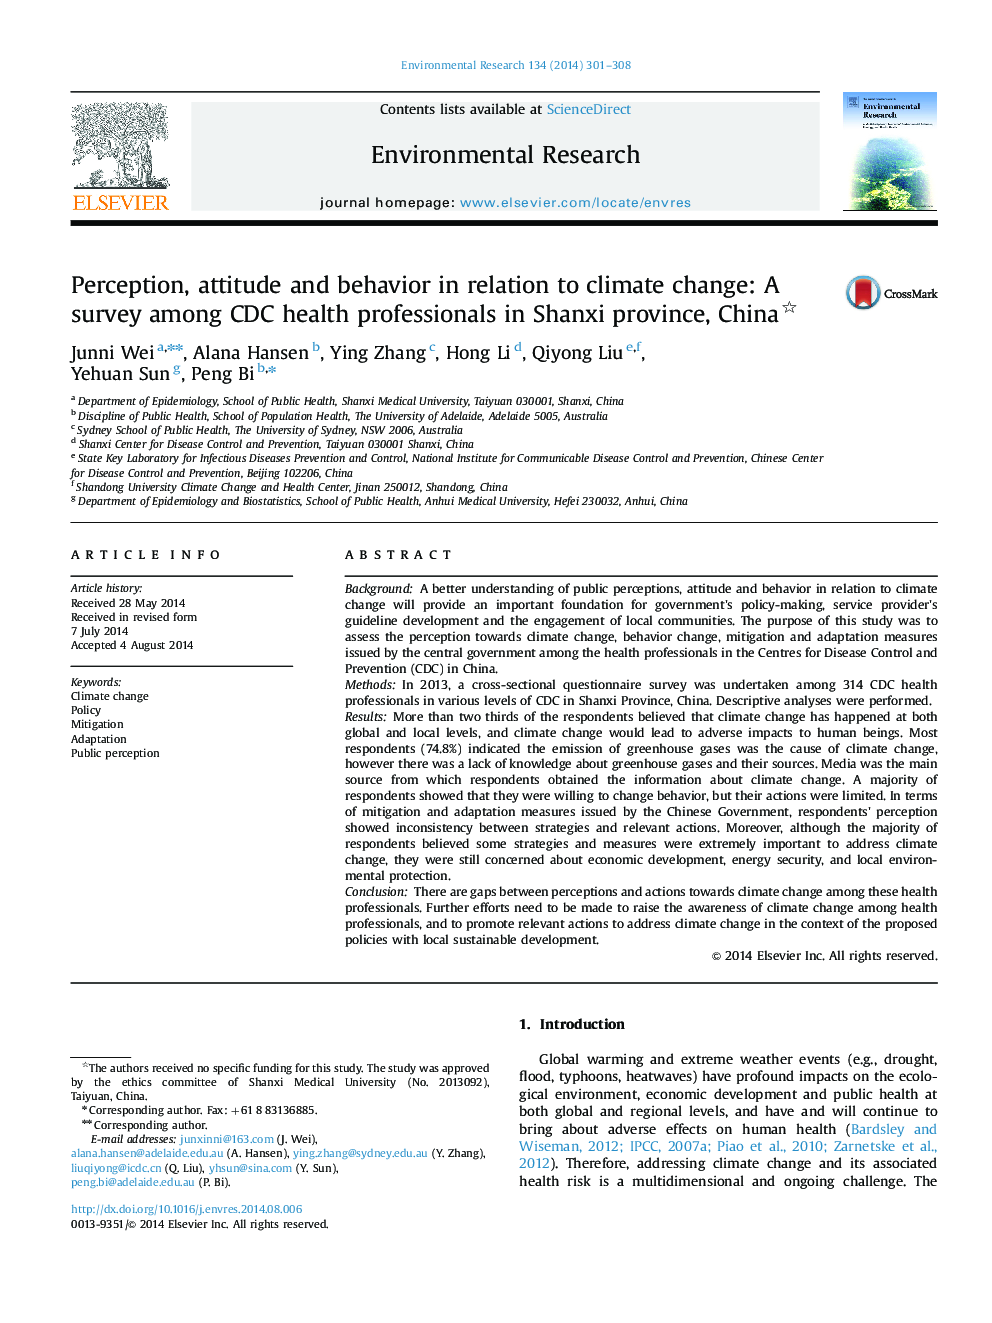 Perception, attitude and behavior in relation to climate change: A survey among CDC health professionals in Shanxi province, China